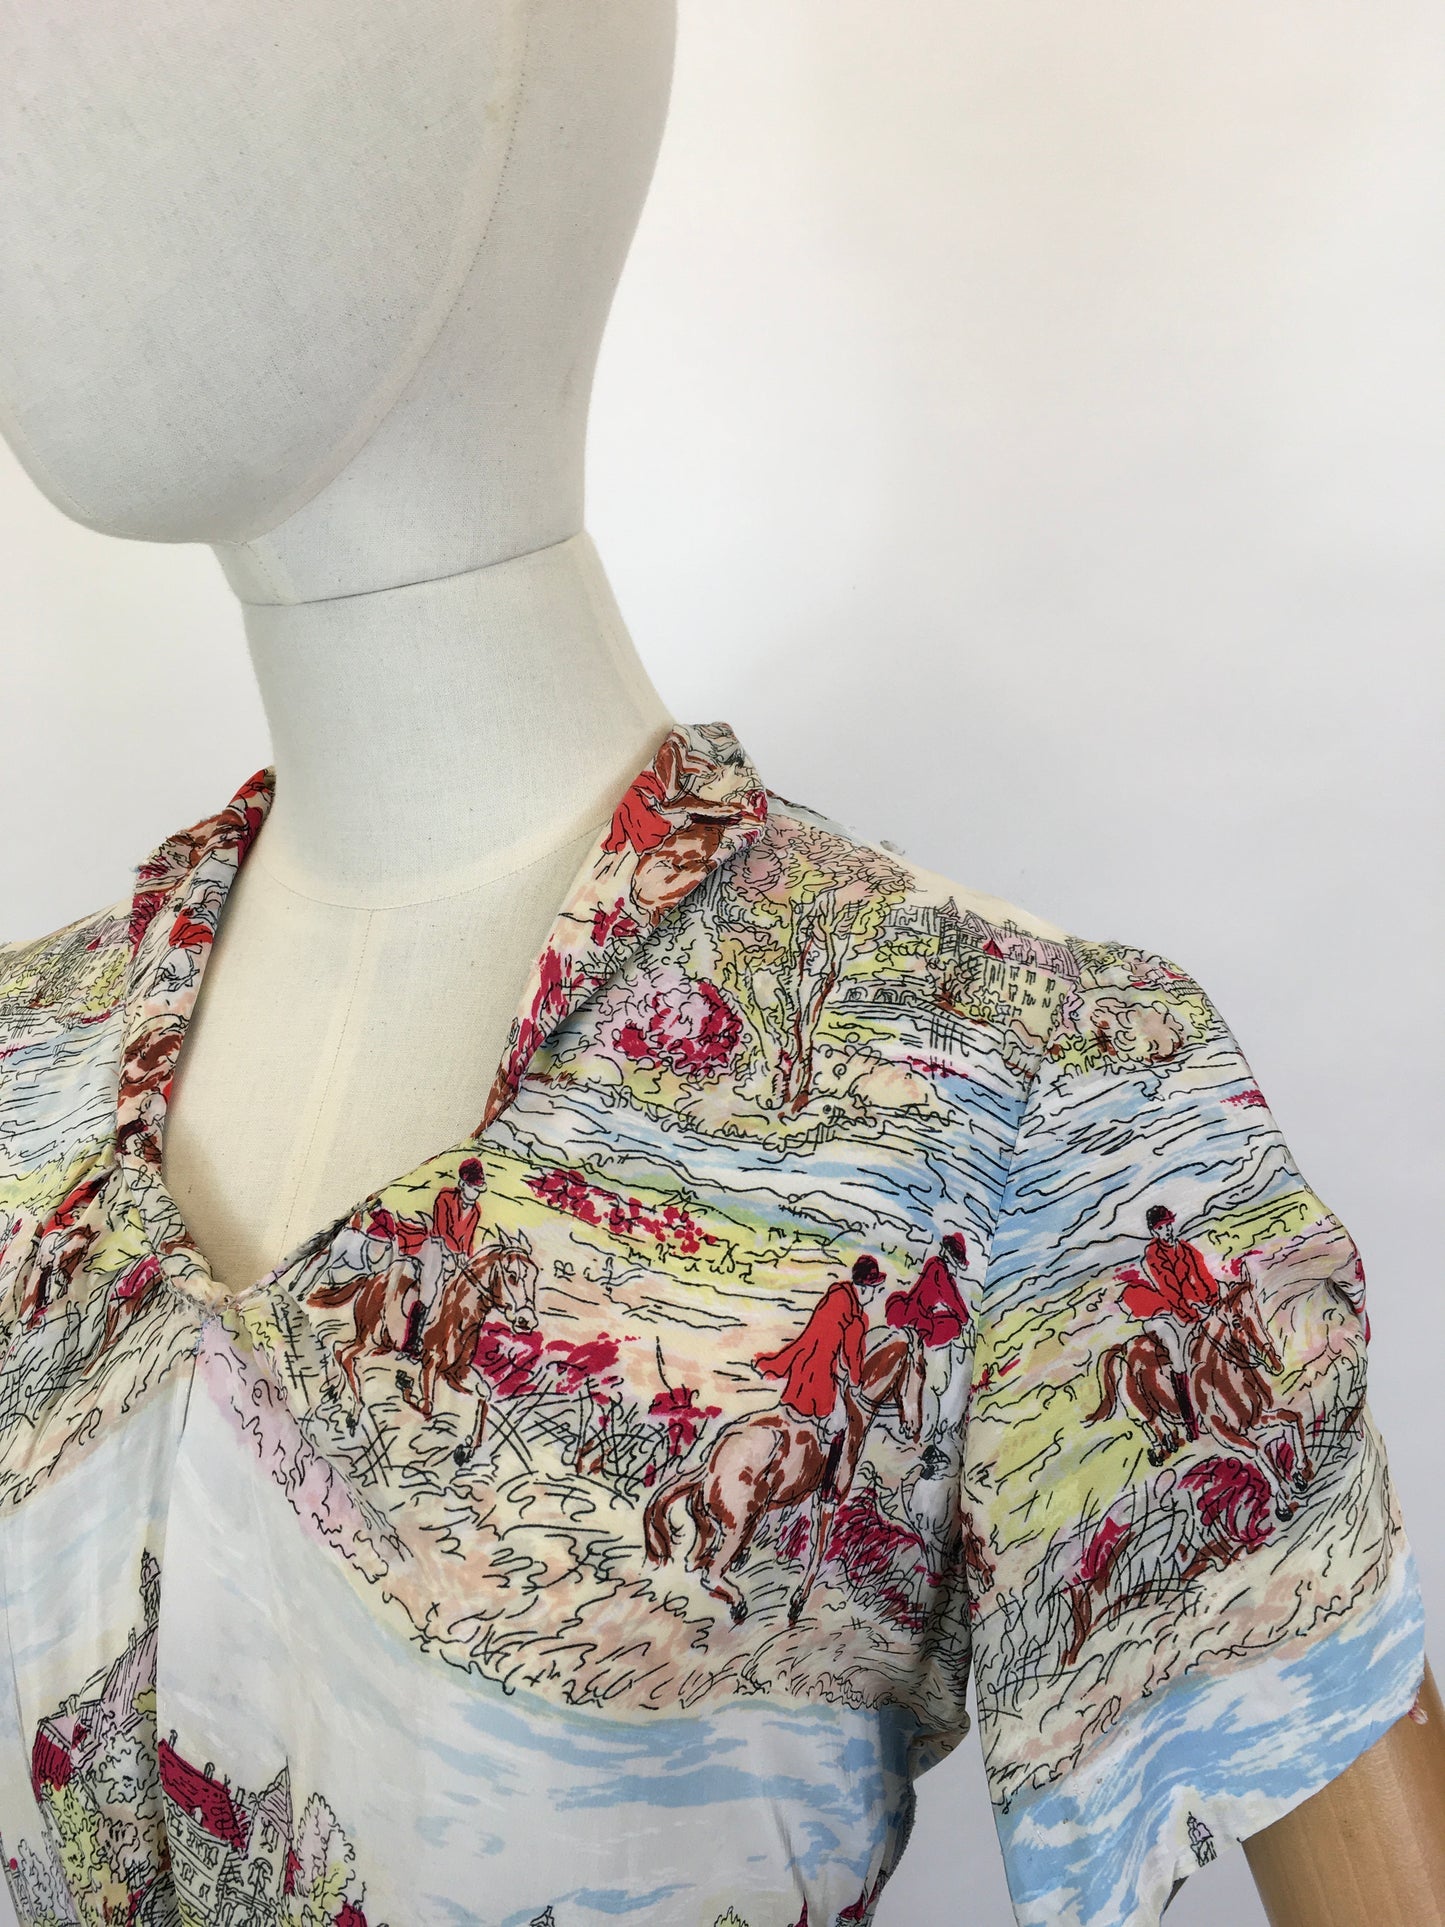 Original 1940’s Silk Novelty Print Dress - With Fabulous Colourings and Details